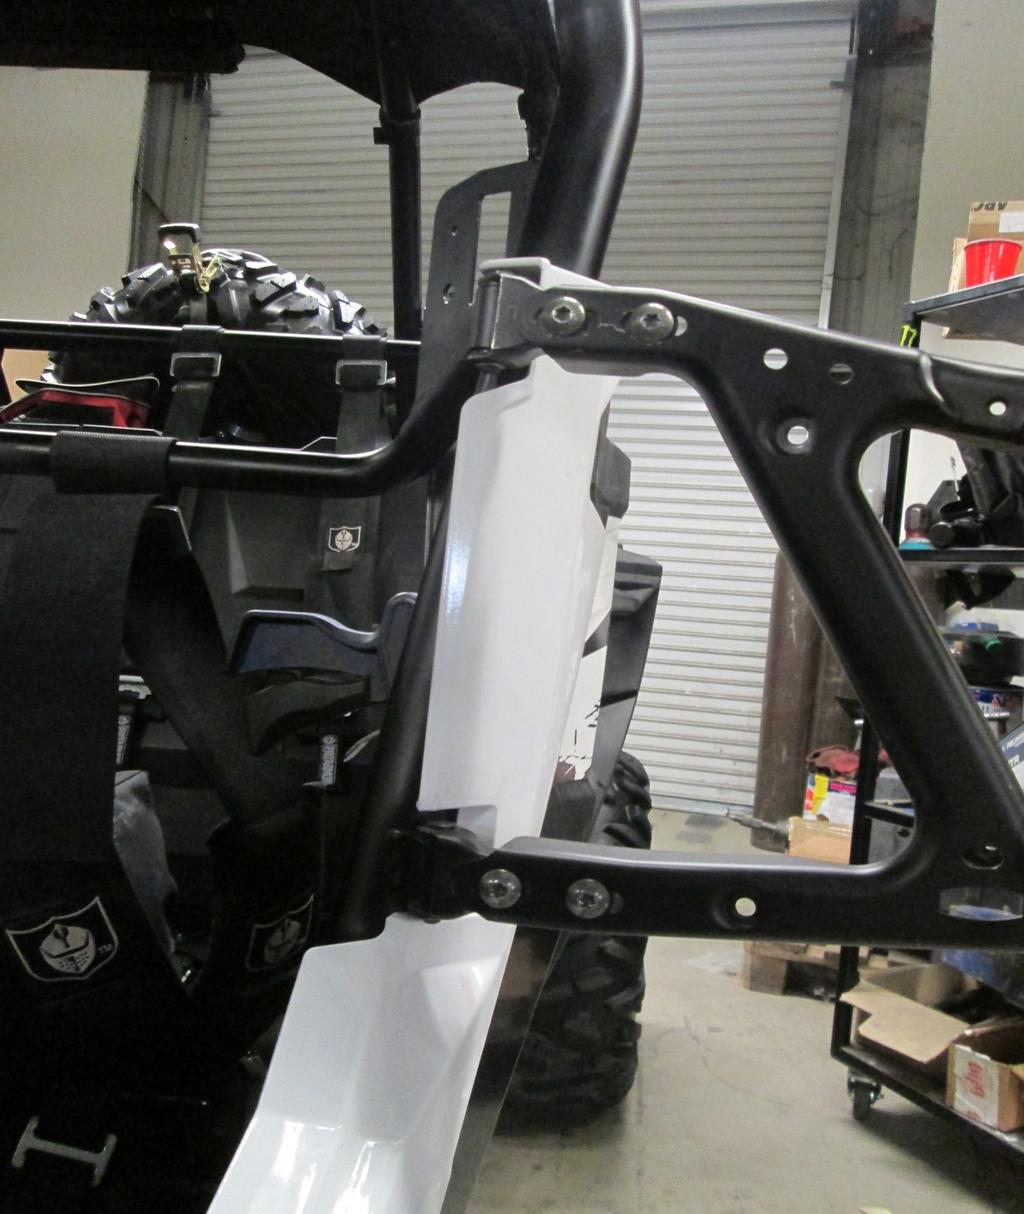 NOTICE Due to the production variances and differing conditions of the frame, door adjustments may be necessary to avoid rubbing and proper fit Ensure proper fit before tightening hardware and